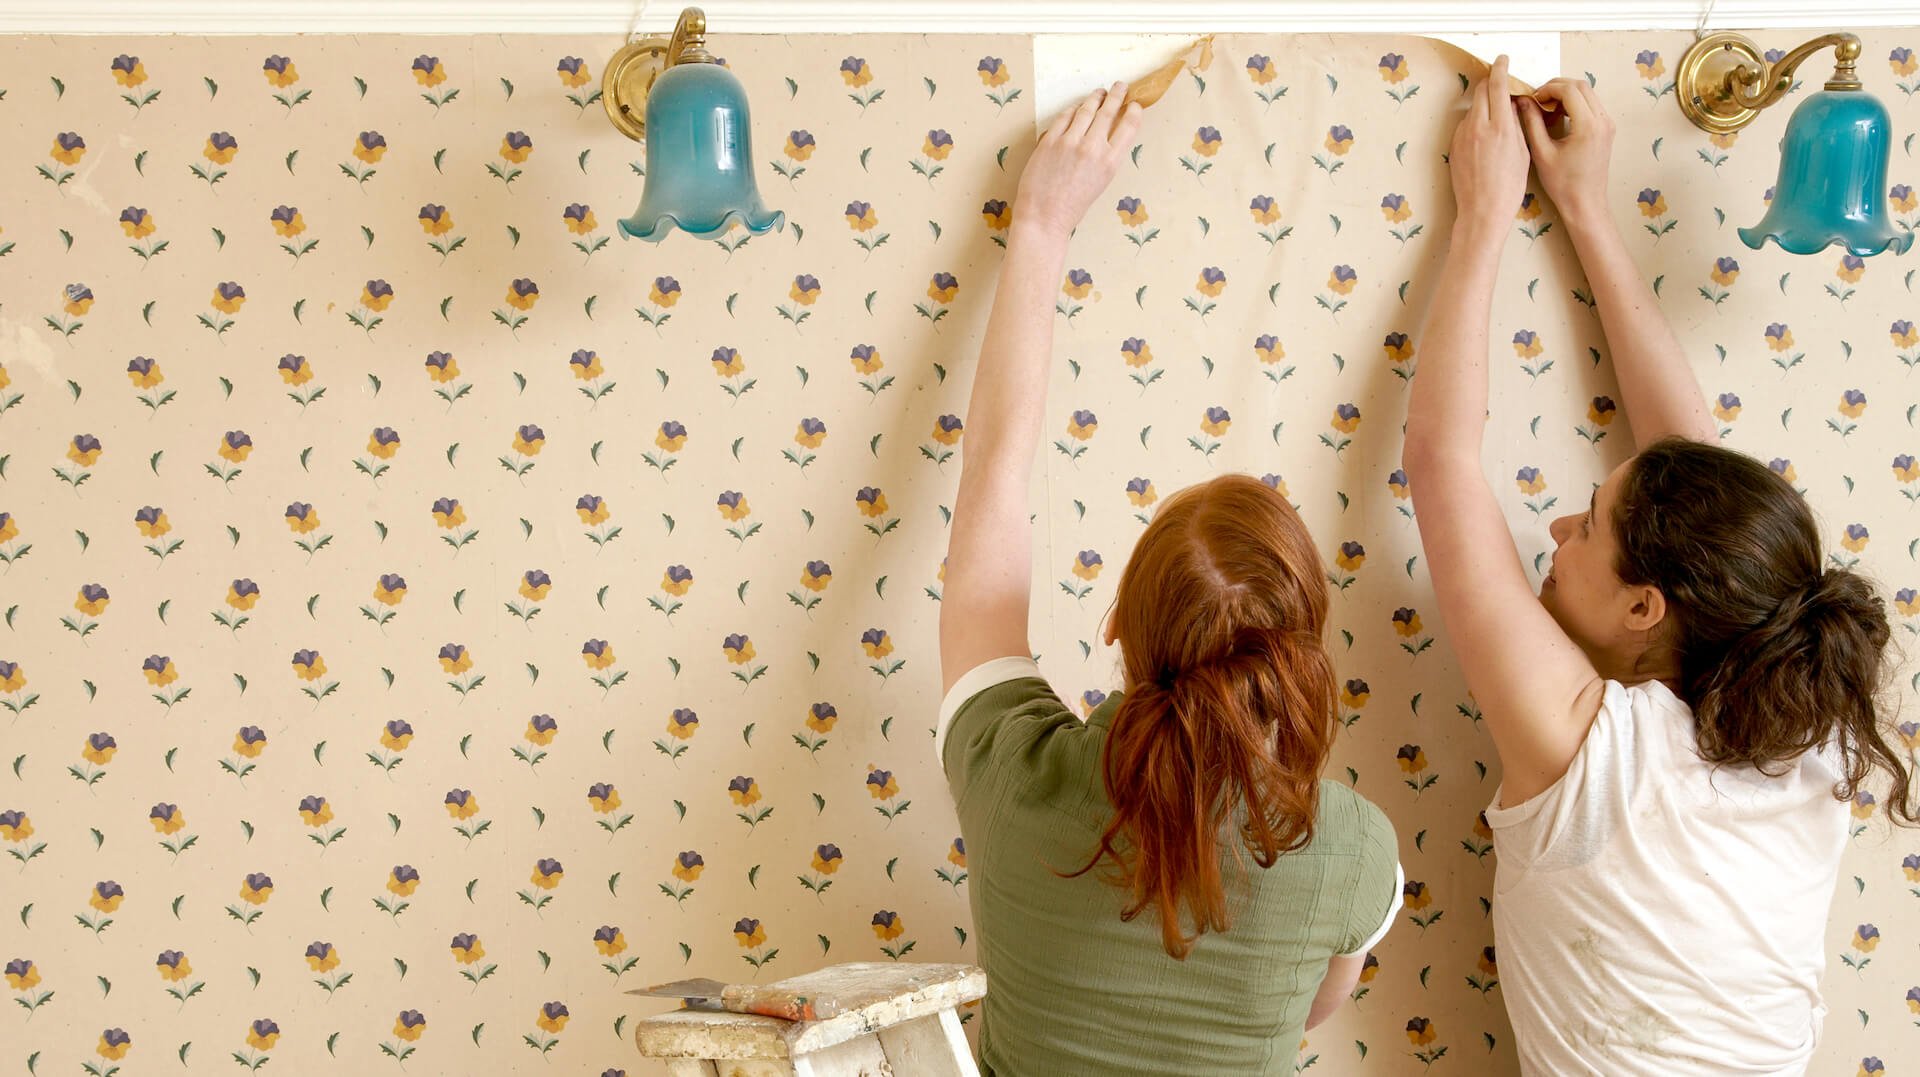 How to Remove Drywall Wallpaper